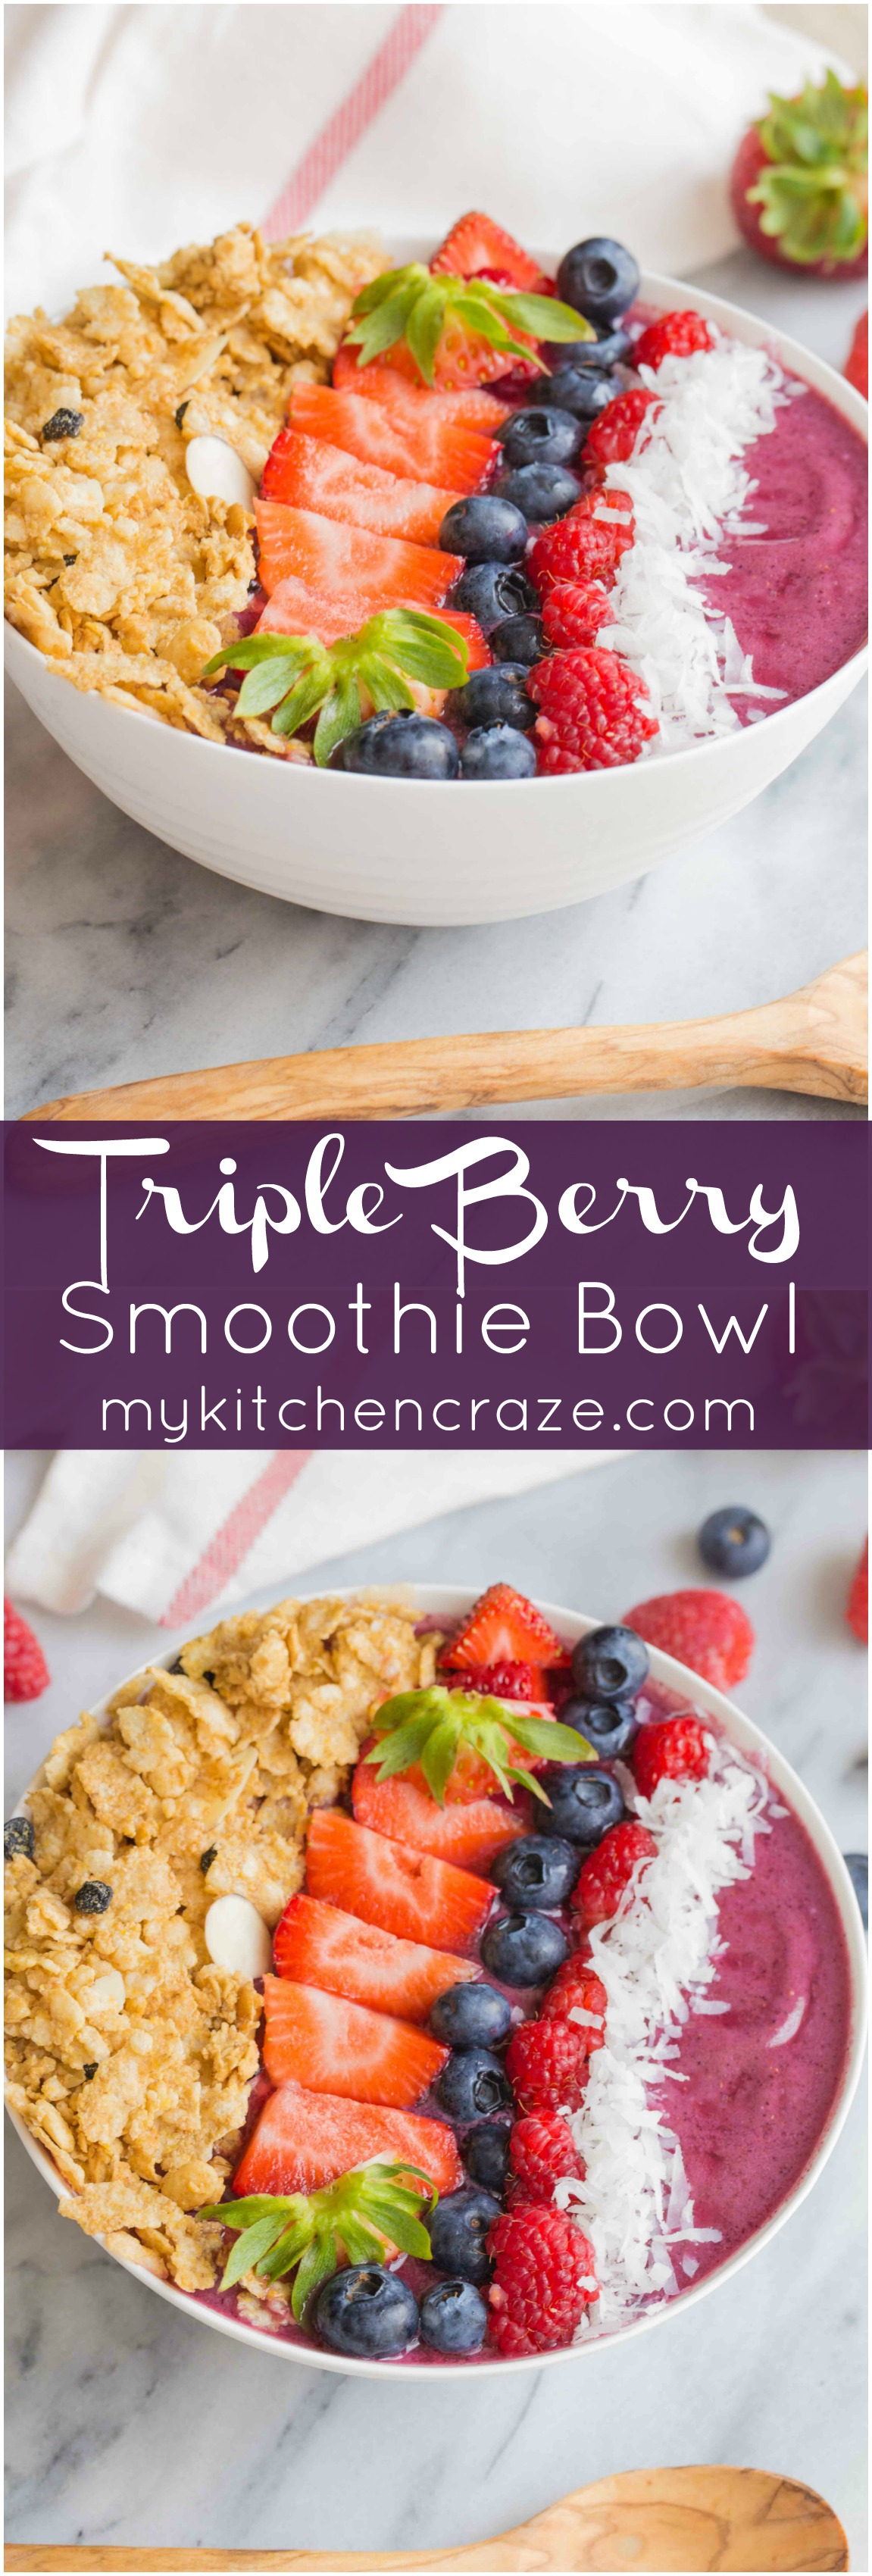 Triple Berry Smoothie Bowl ~ mykitchencraze.com ~ #CerealAnytime #ad